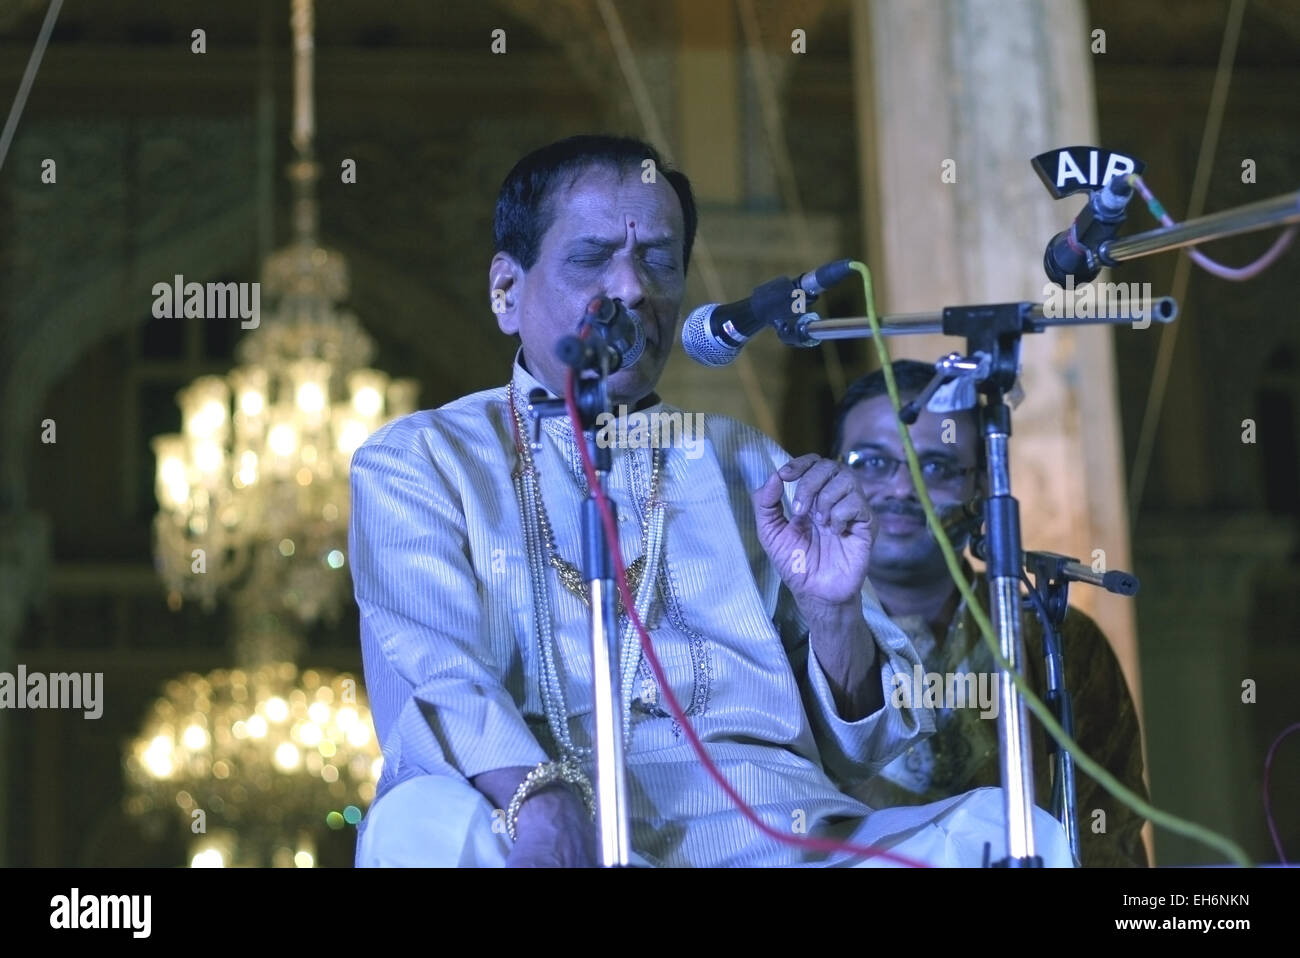 Dr.M.Balamurali Krishna Carnatic vocalist and singer Perform at Chowmahalla Palace on April 18,2012 in Hyderabad,Ap,India. Stock Photo